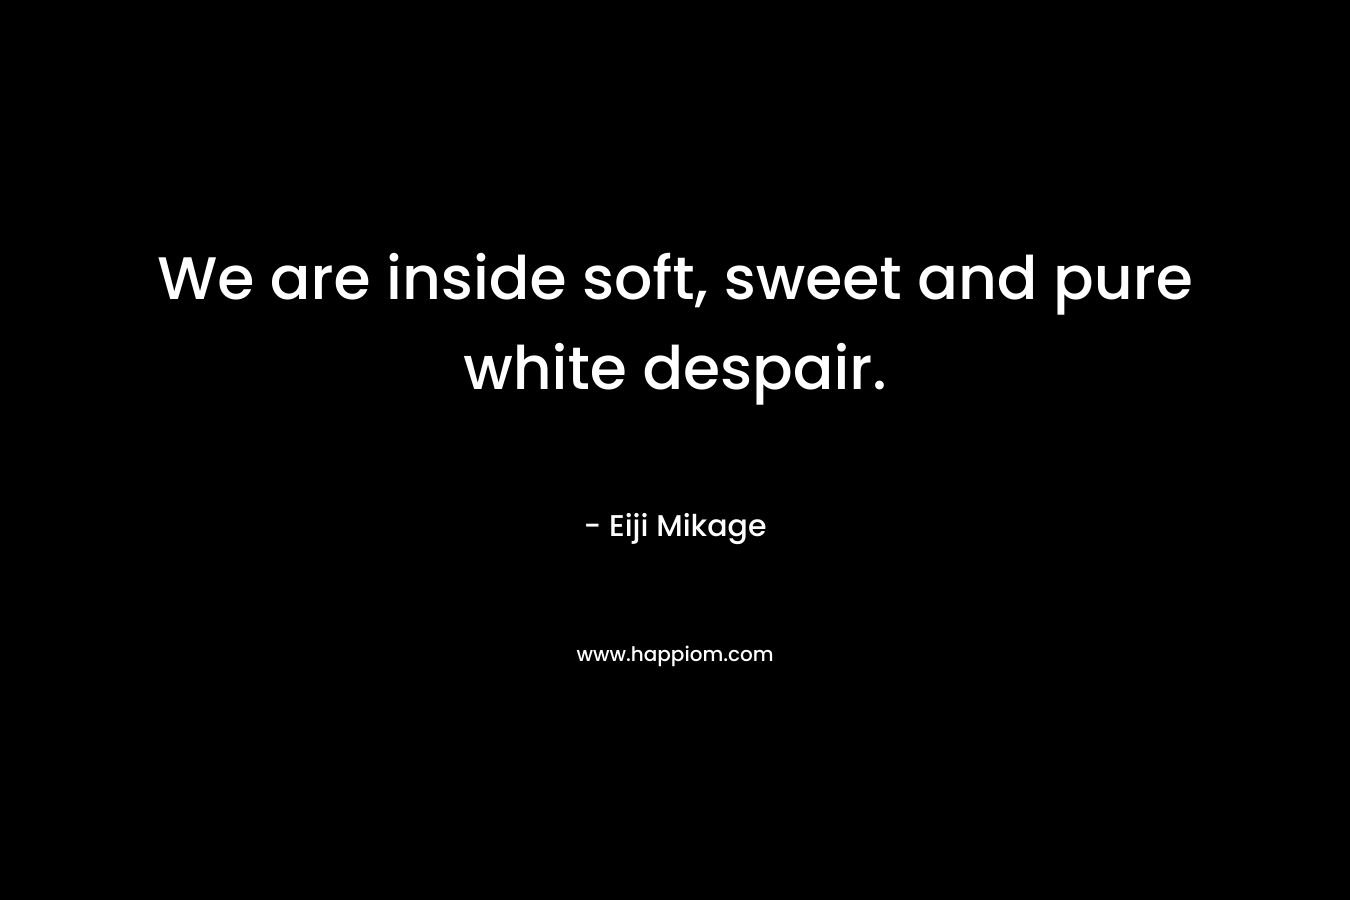 We are inside soft, sweet and pure white despair. – Eiji Mikage